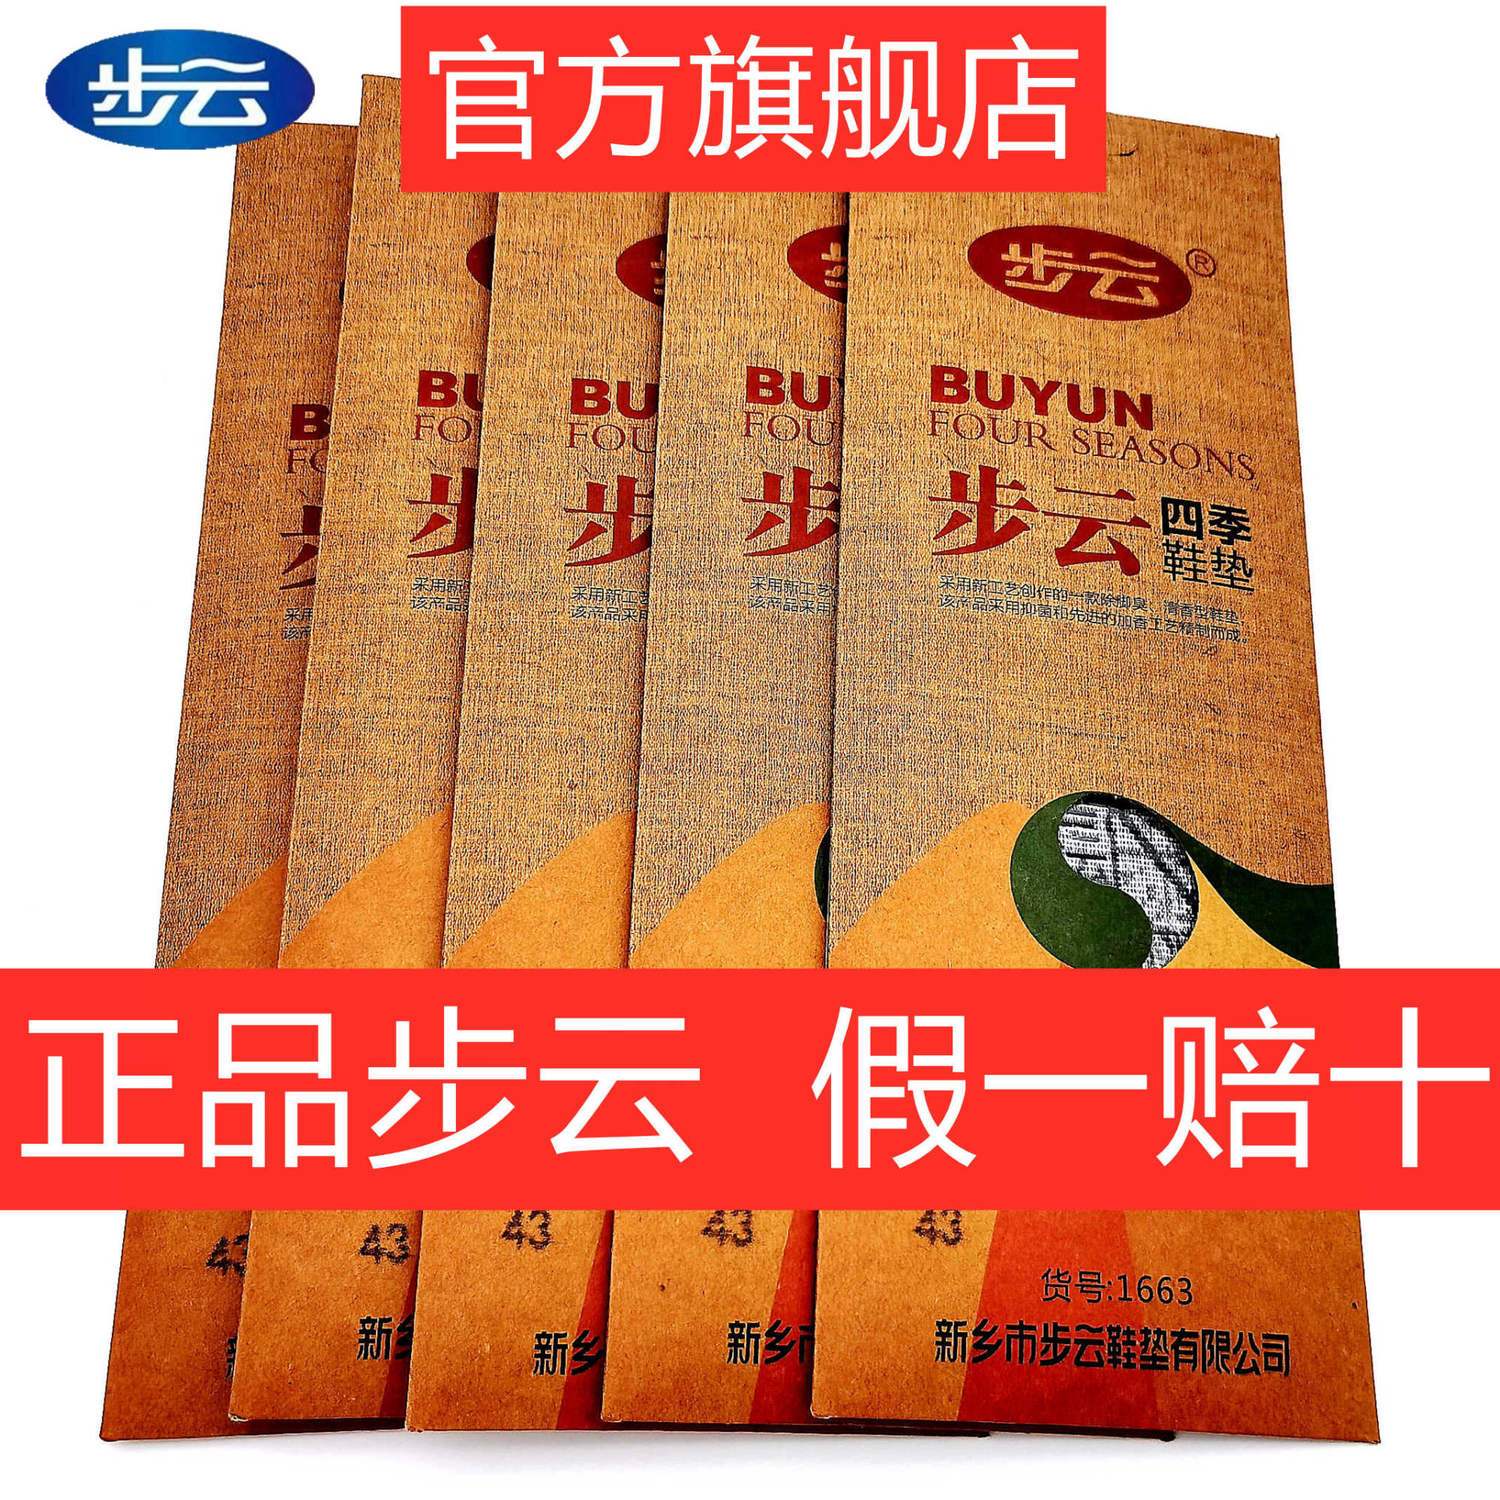 Authentic Buyun 1663 Four Seasons Deodorant Insole Sweat Feet Deodorant Breathable Fragrance Men and Women Traditional Chinese Medicine Flavor Anti-Wrinkle Insole